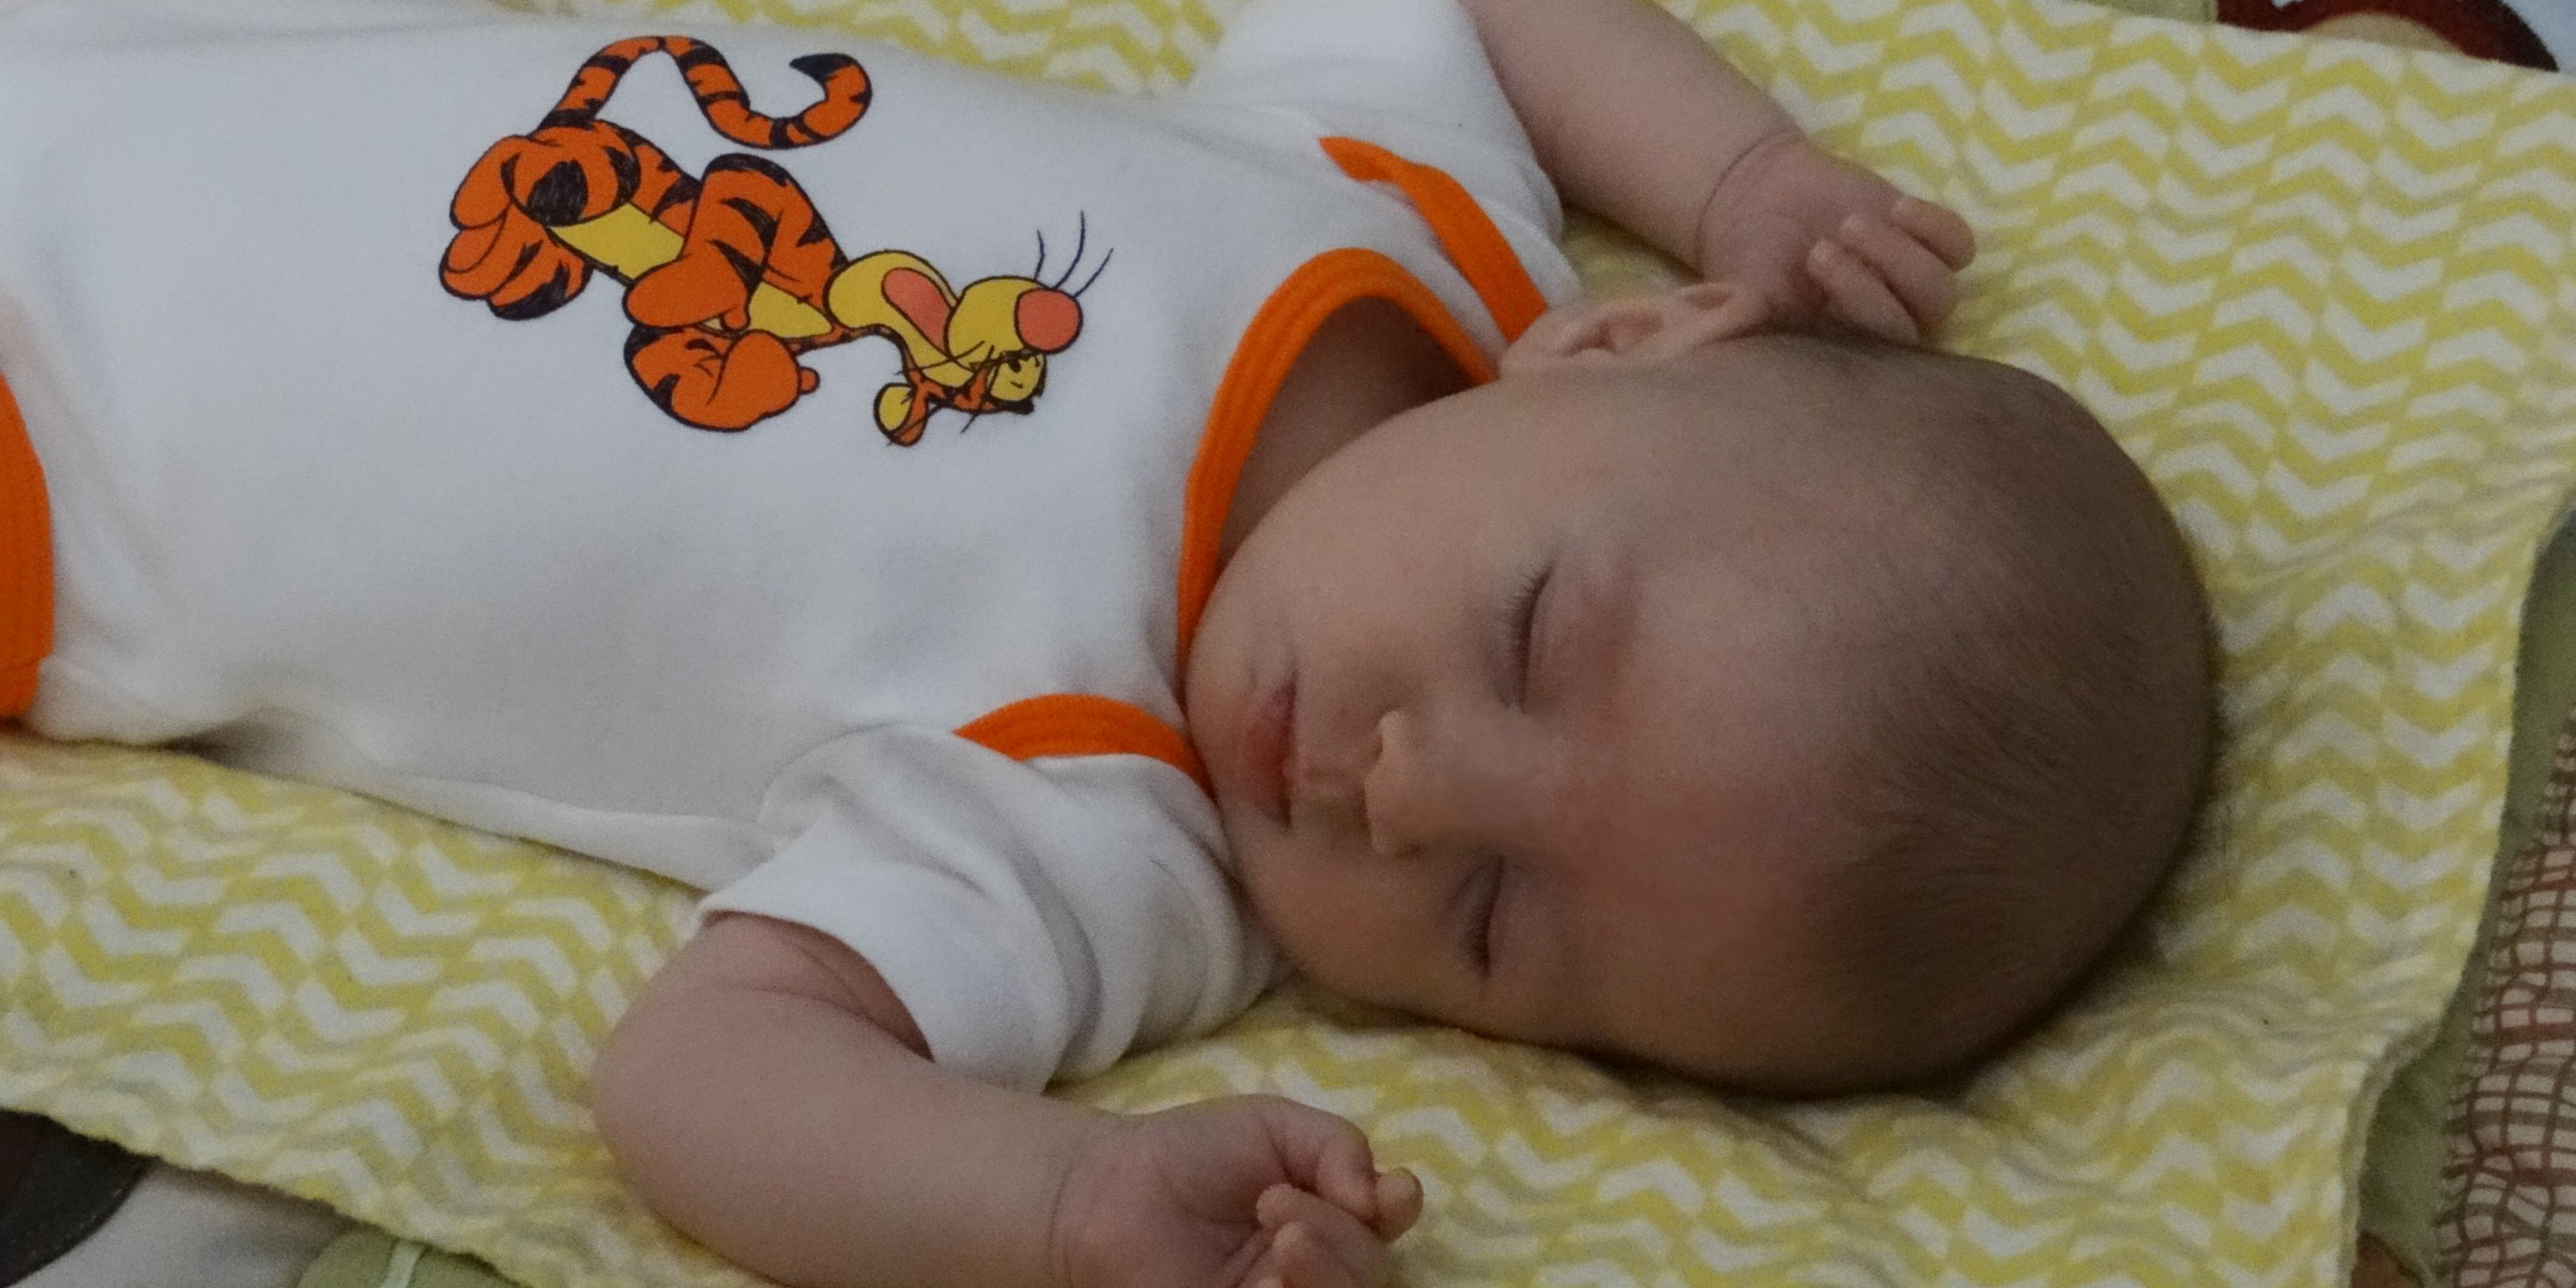 Sleeping baby in Tigger outfit